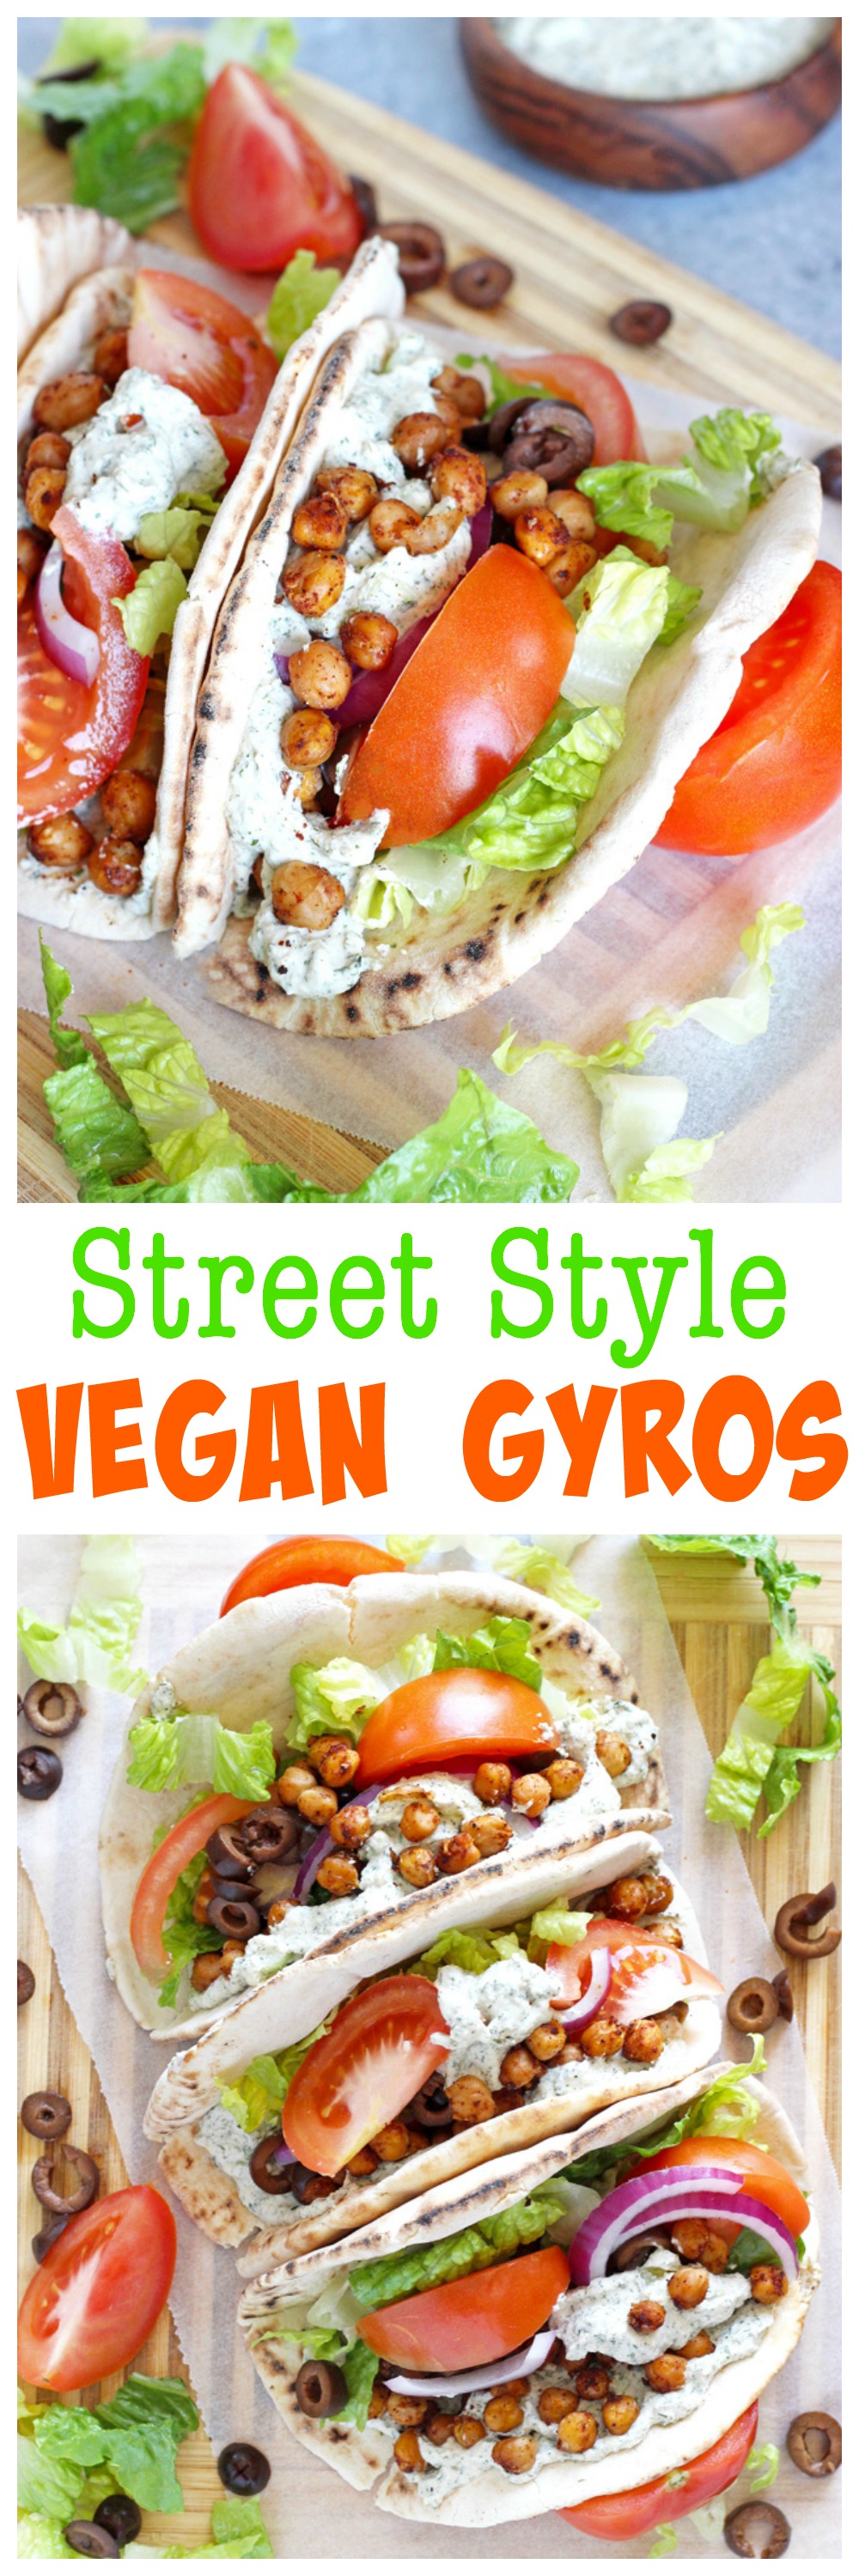 Street Style Vegan Gyros - These delectably delicious gyros are an easy win for the big game. Get messy and dig in! NeuroticMommy.com #vegan #healthy #superbowl